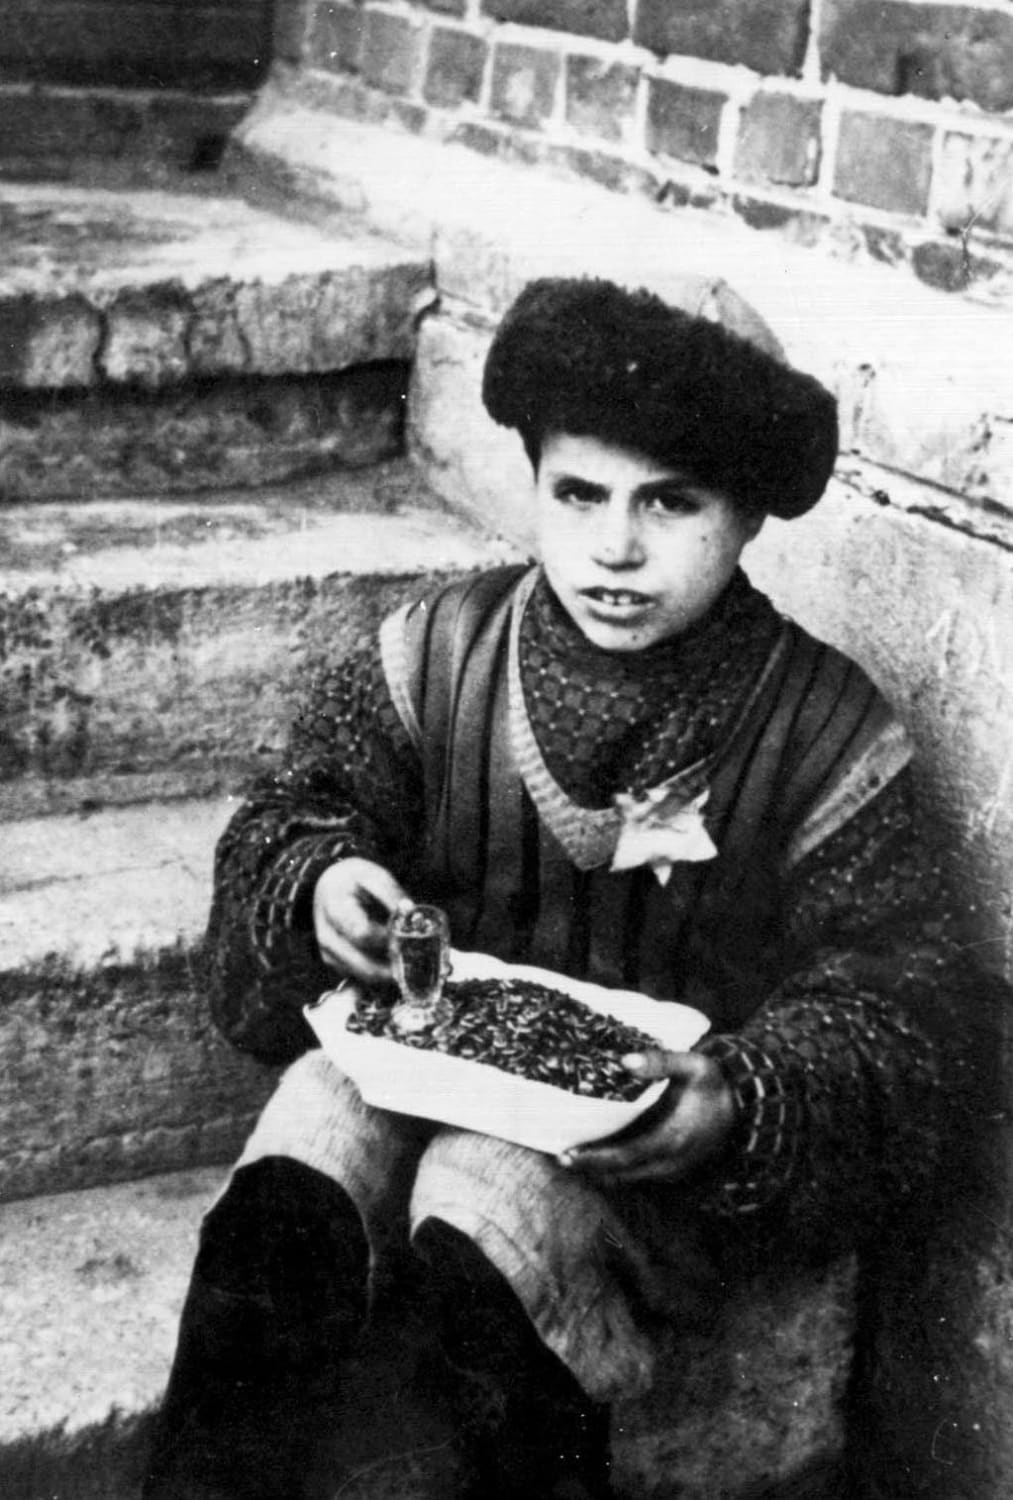 A child selling seeds in the Kovno (Kaunas) Ghetto in Nazi-occupied Lithuania, 1940s.